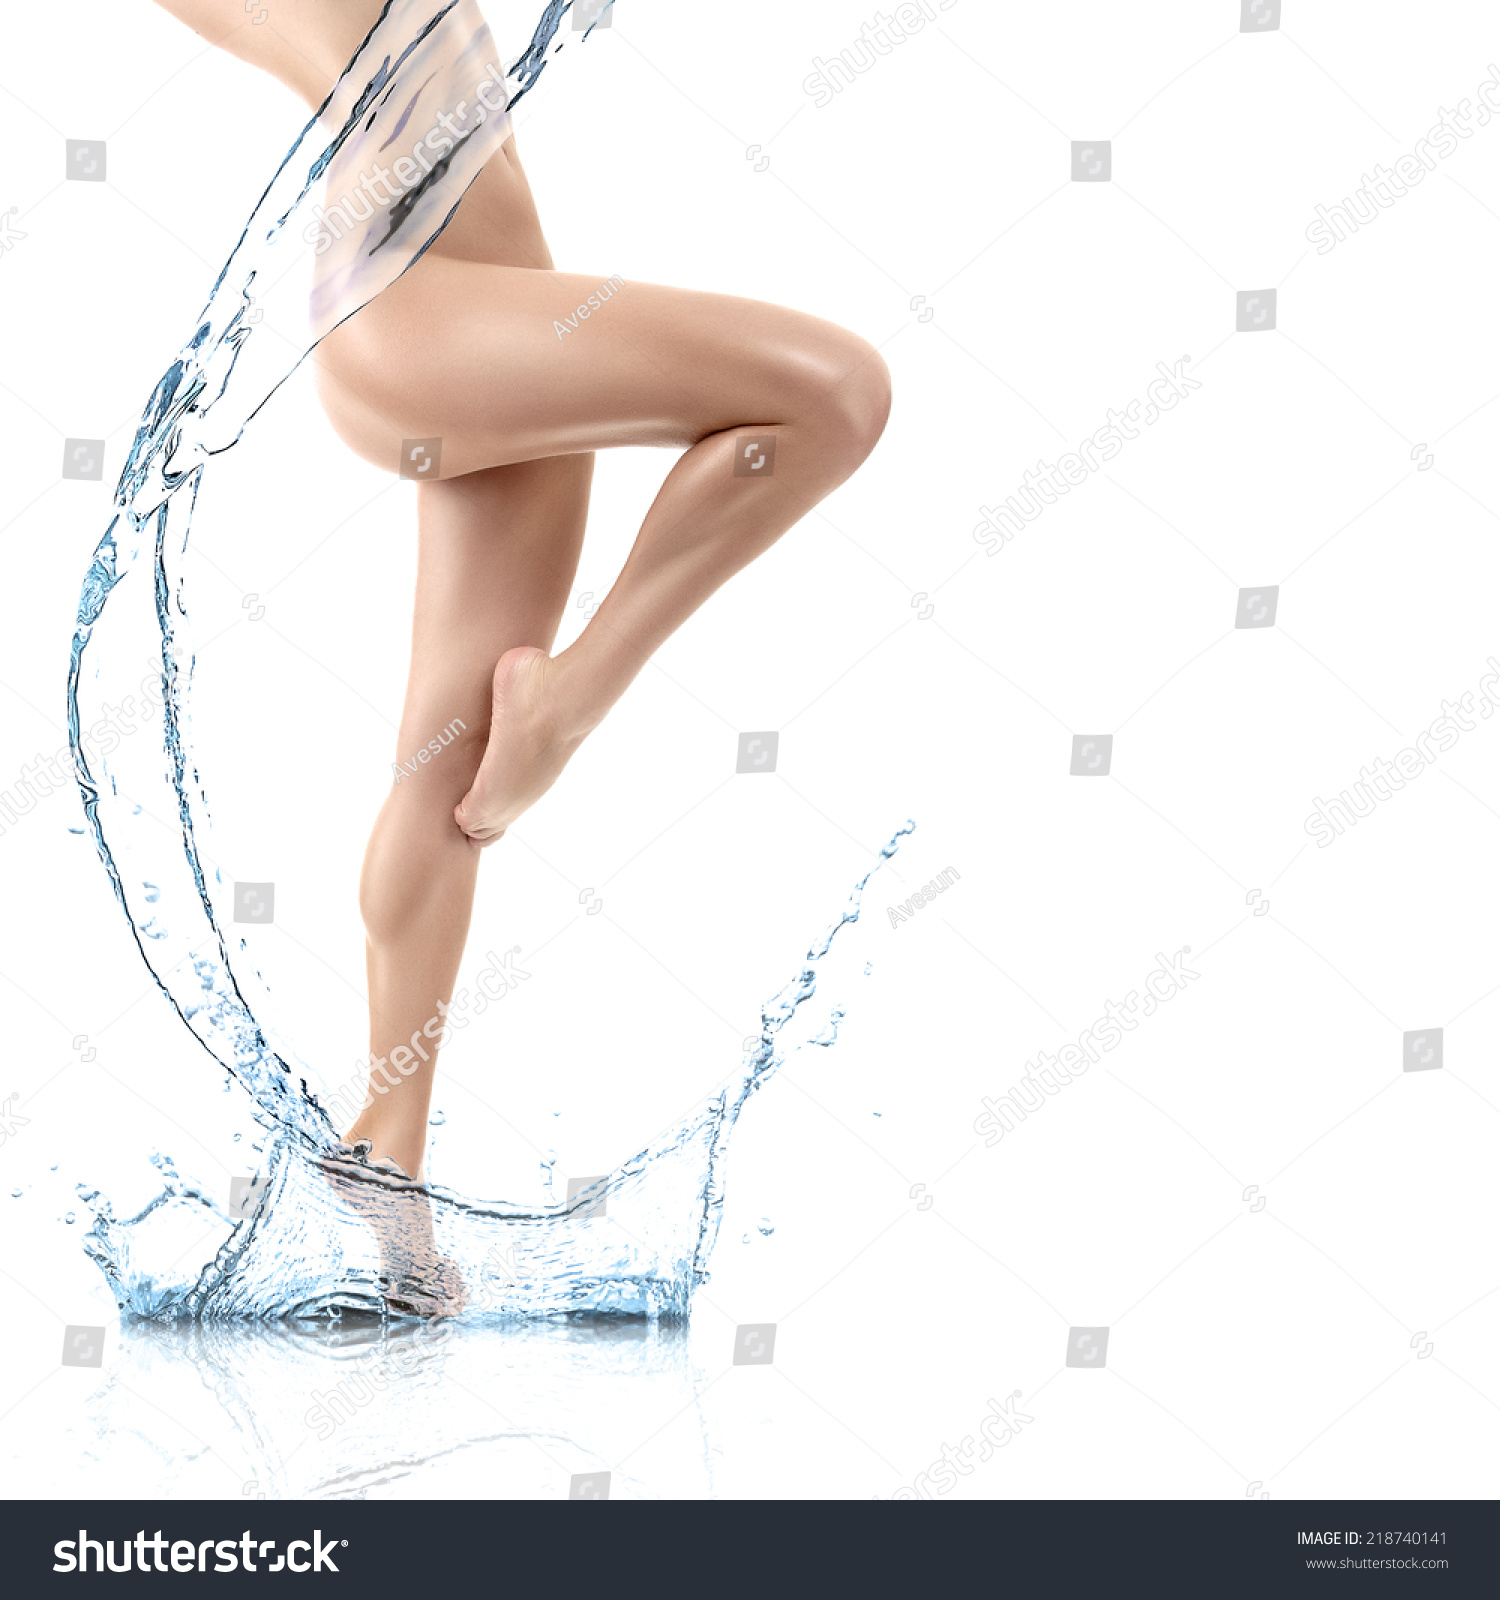 Design of young woman body with clean water splash isolated on white background #218740141